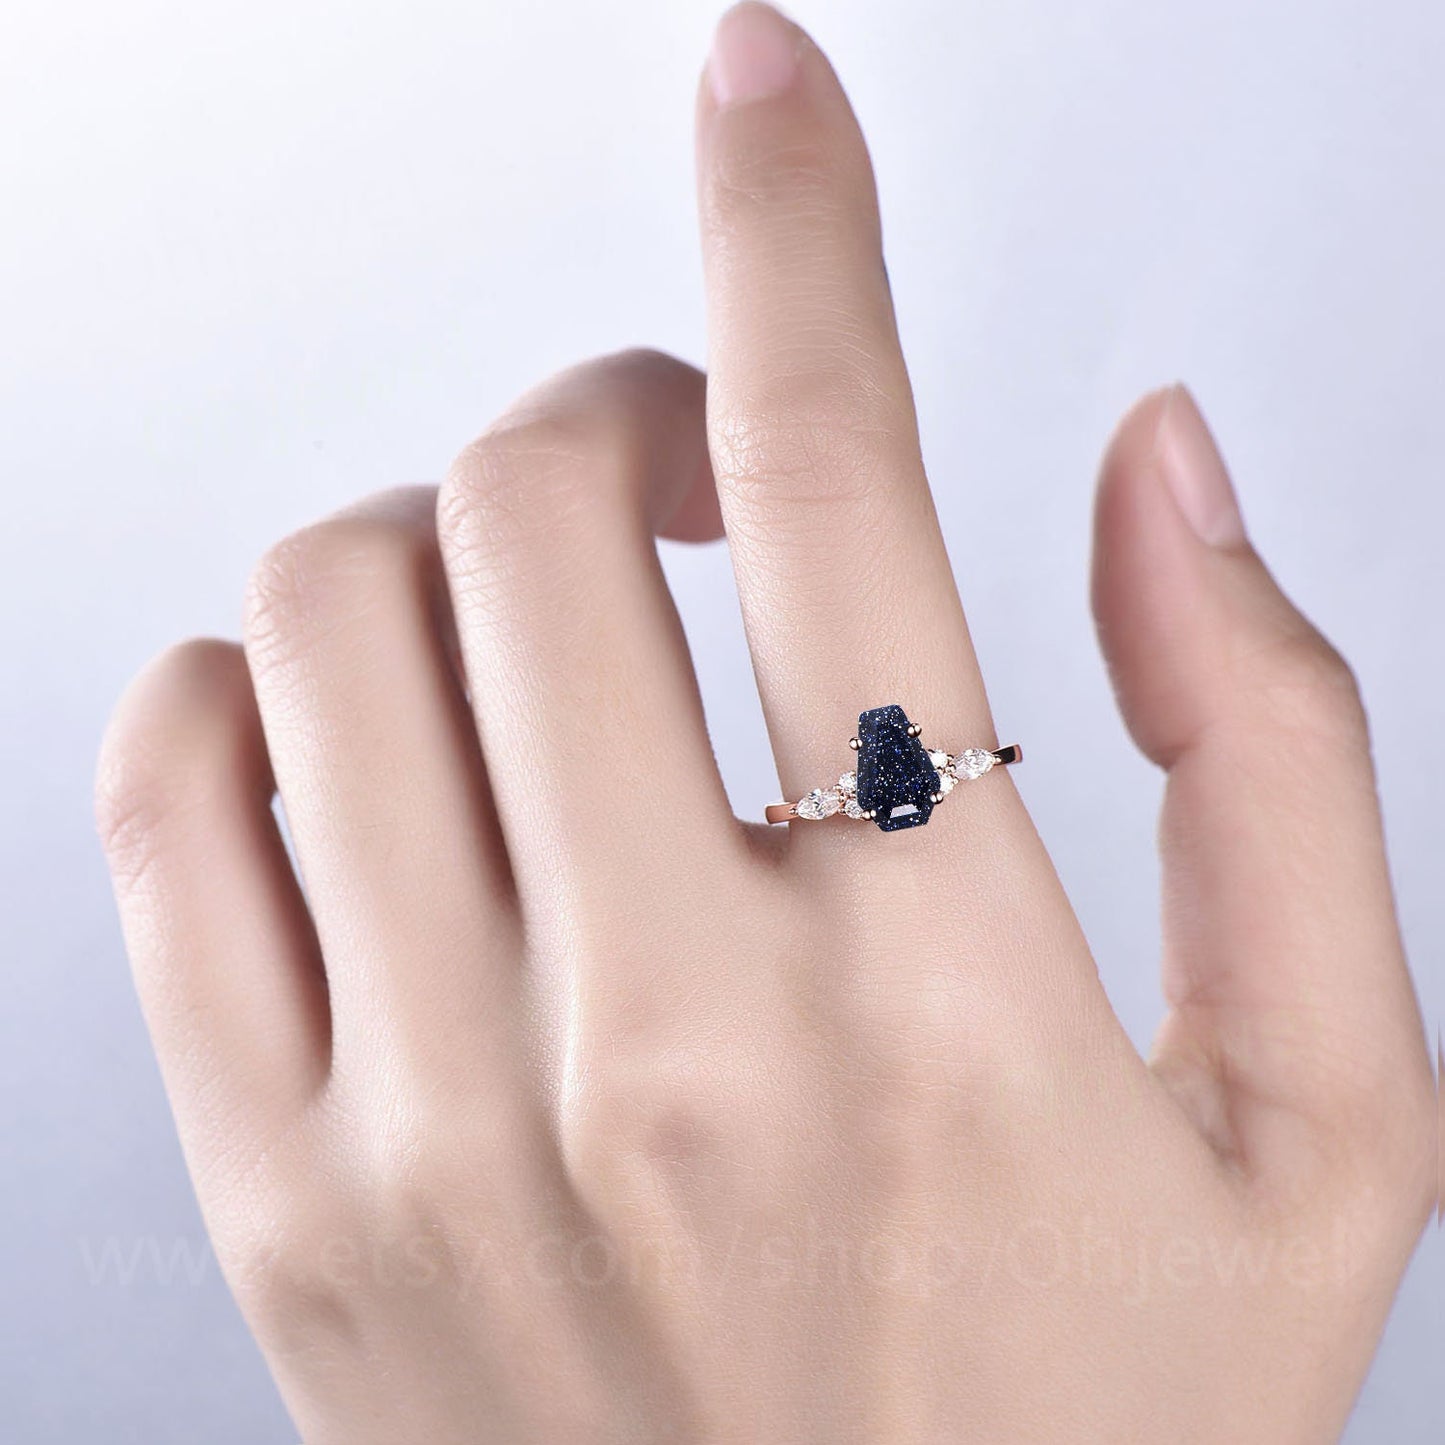 Coffin shaped blue sandstone ring unique engagement ring 14k rose gold silver blue goldstone ring diamond anniversary  promise ring women